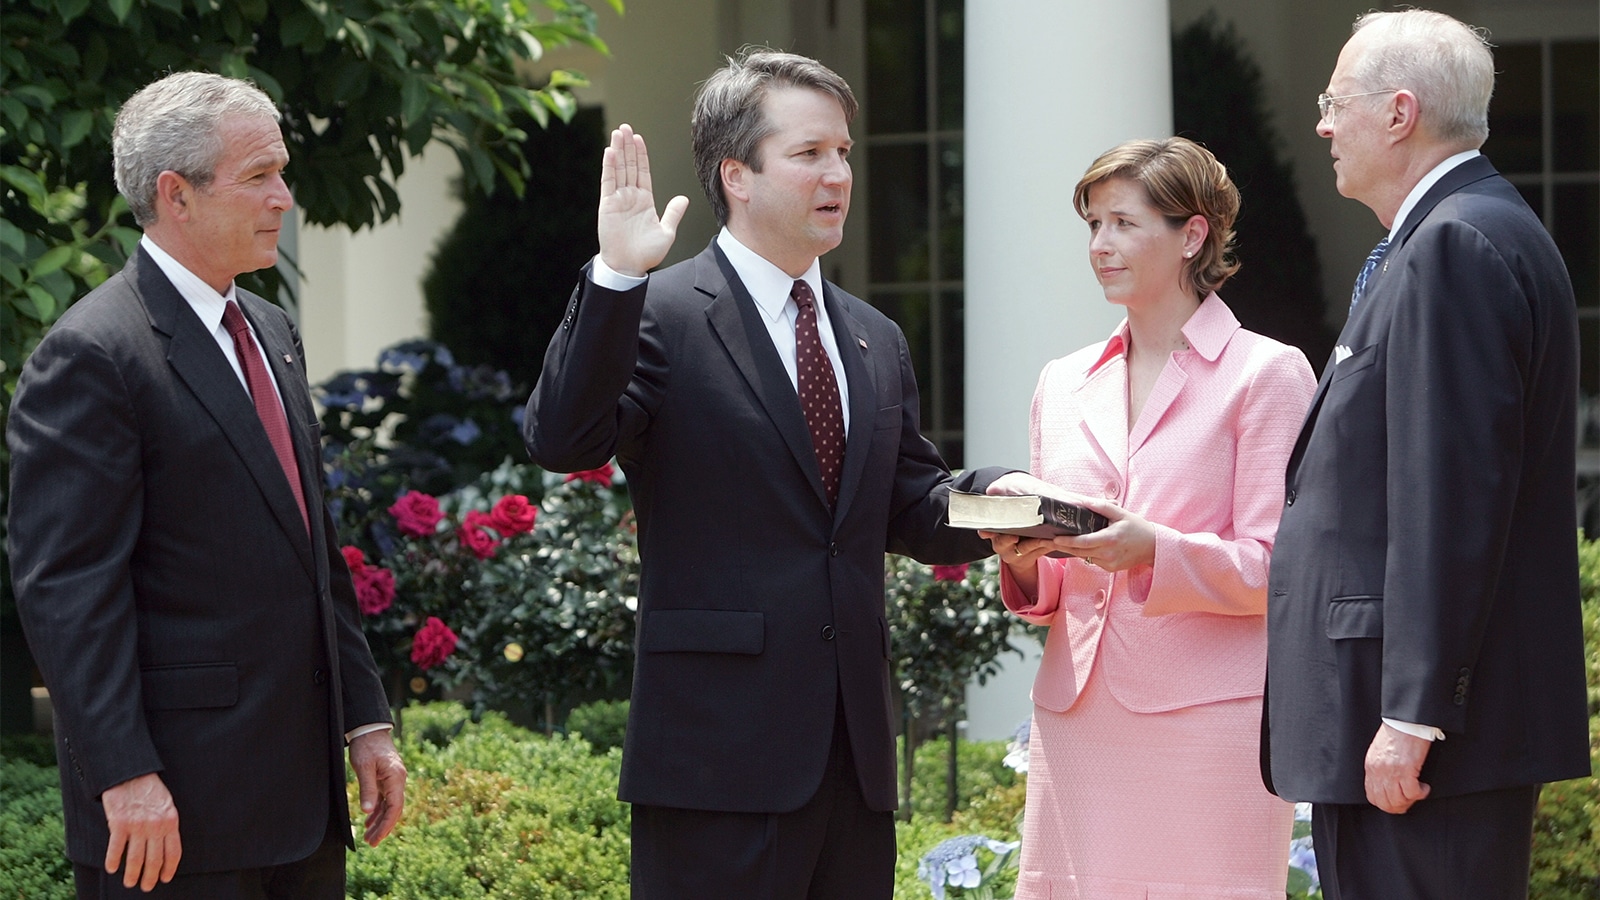 In this June 1, 2006, file photo, from left to right, President Bush watches the swearing-in of Brett Kavanaugh as judge for the U.S. Court of Appeals for the District of Columbia by U.S. Supreme Court Associate Justice Anthony M. Kennedy, far right, during a ceremony in the Rose Garden of the White House, in Washington. Holding the Bible is Kavanaugh’s wife, Ashley Kavanaugh. (AP Photo/Pablo Martinez Monsivais)